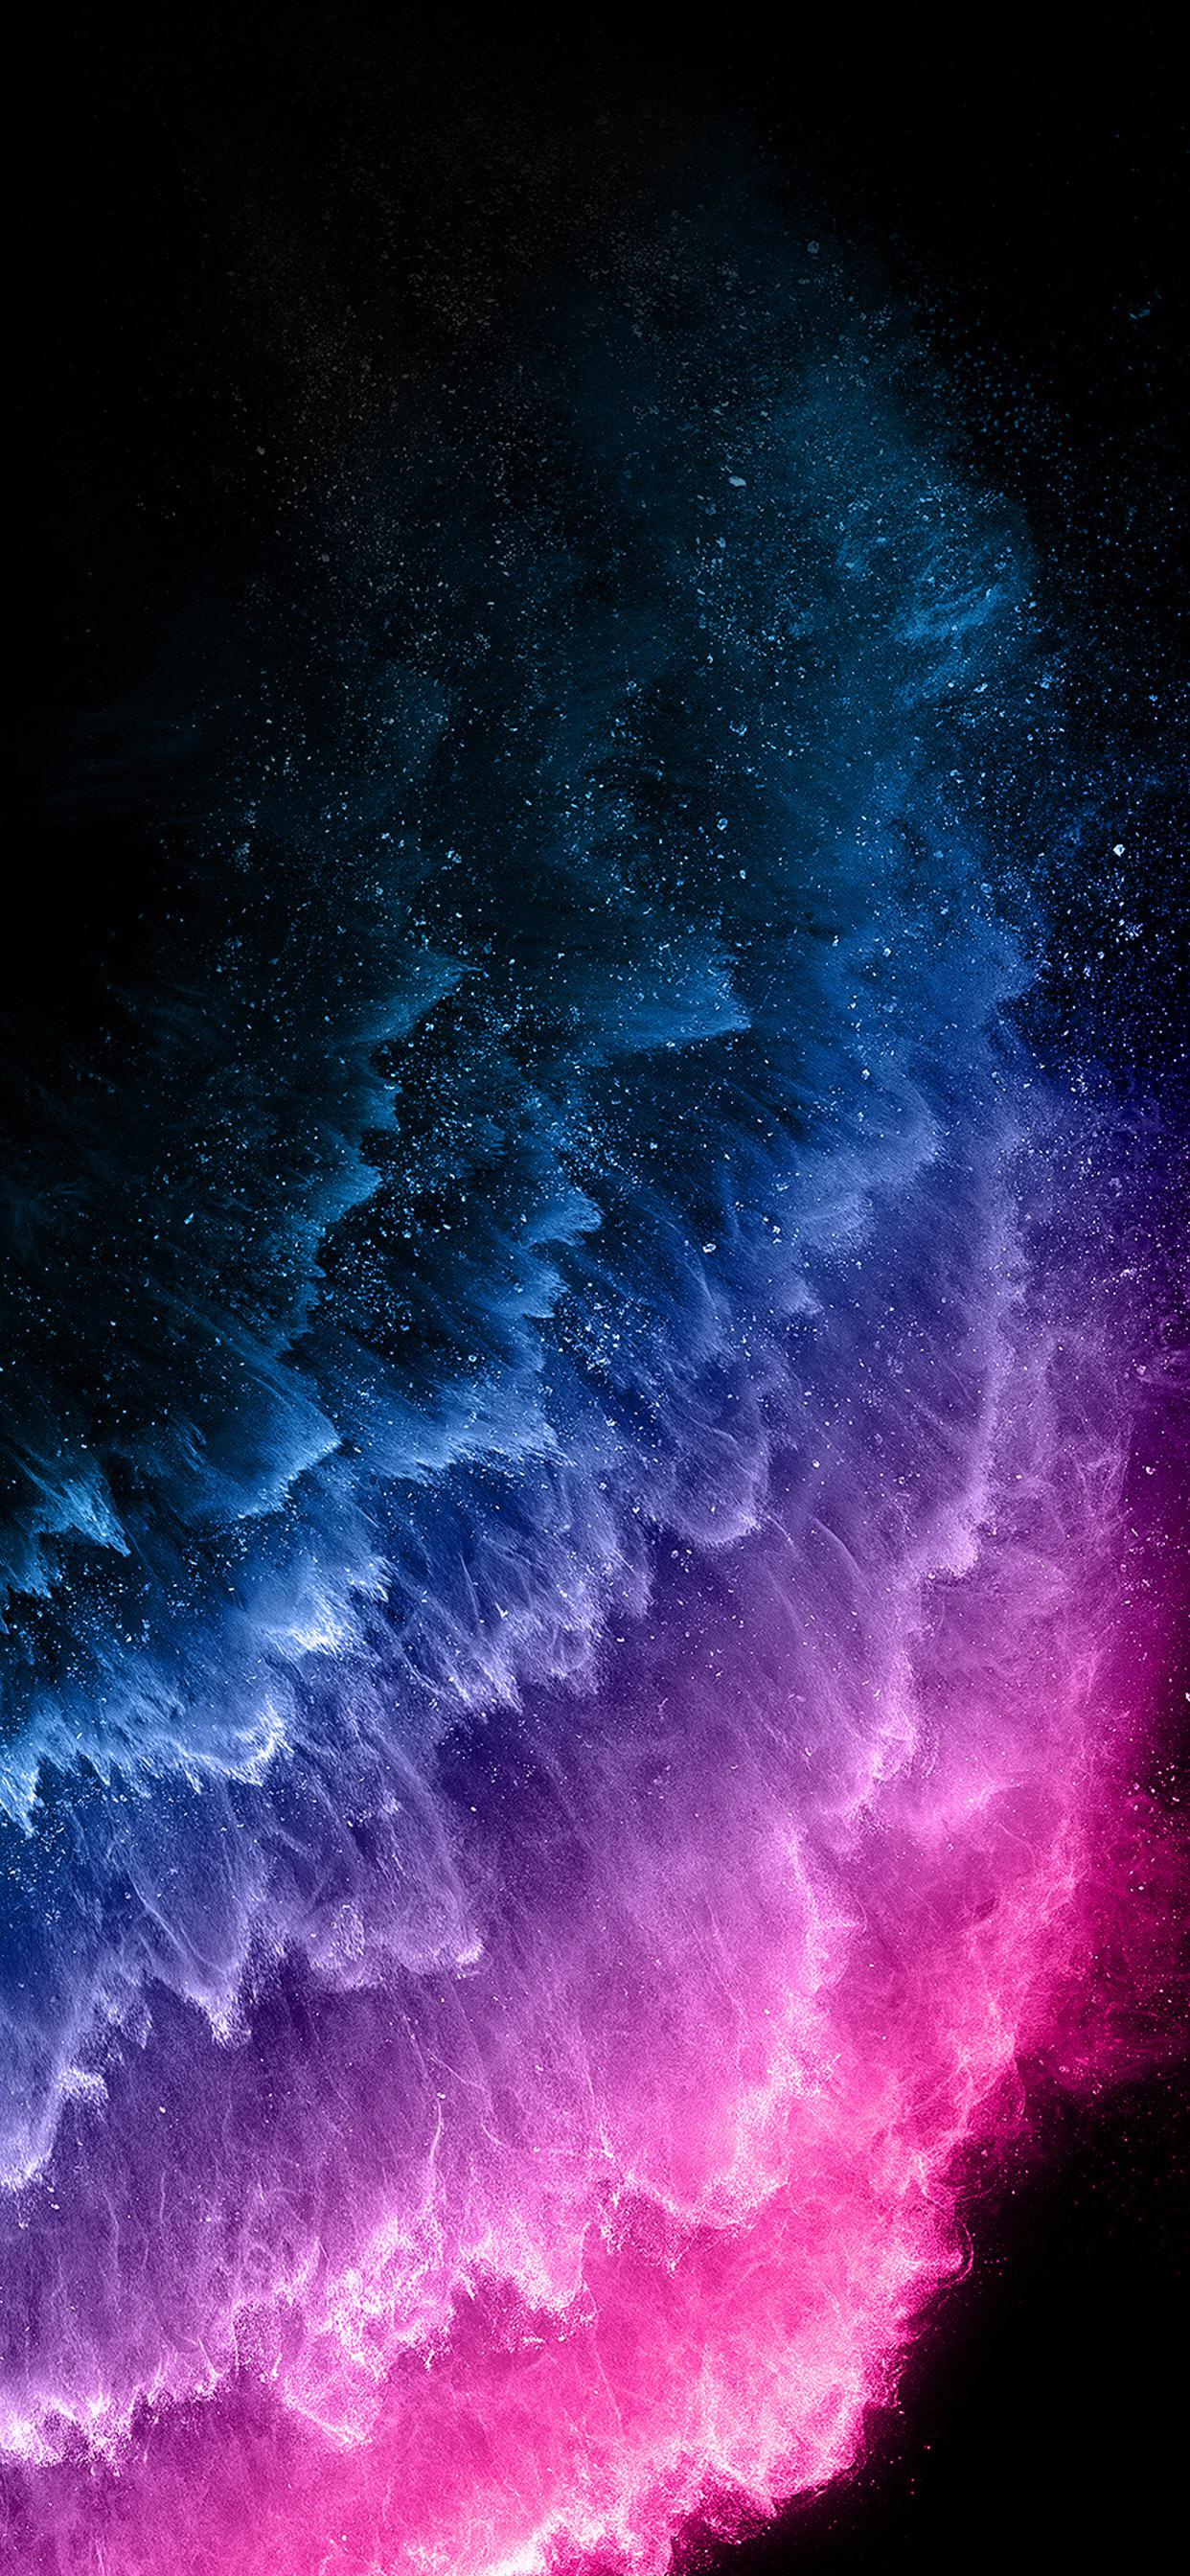 IOS 11, Apples, Android, Ios, Atmosphere. Wallpaper in 1242x2688 Resolution